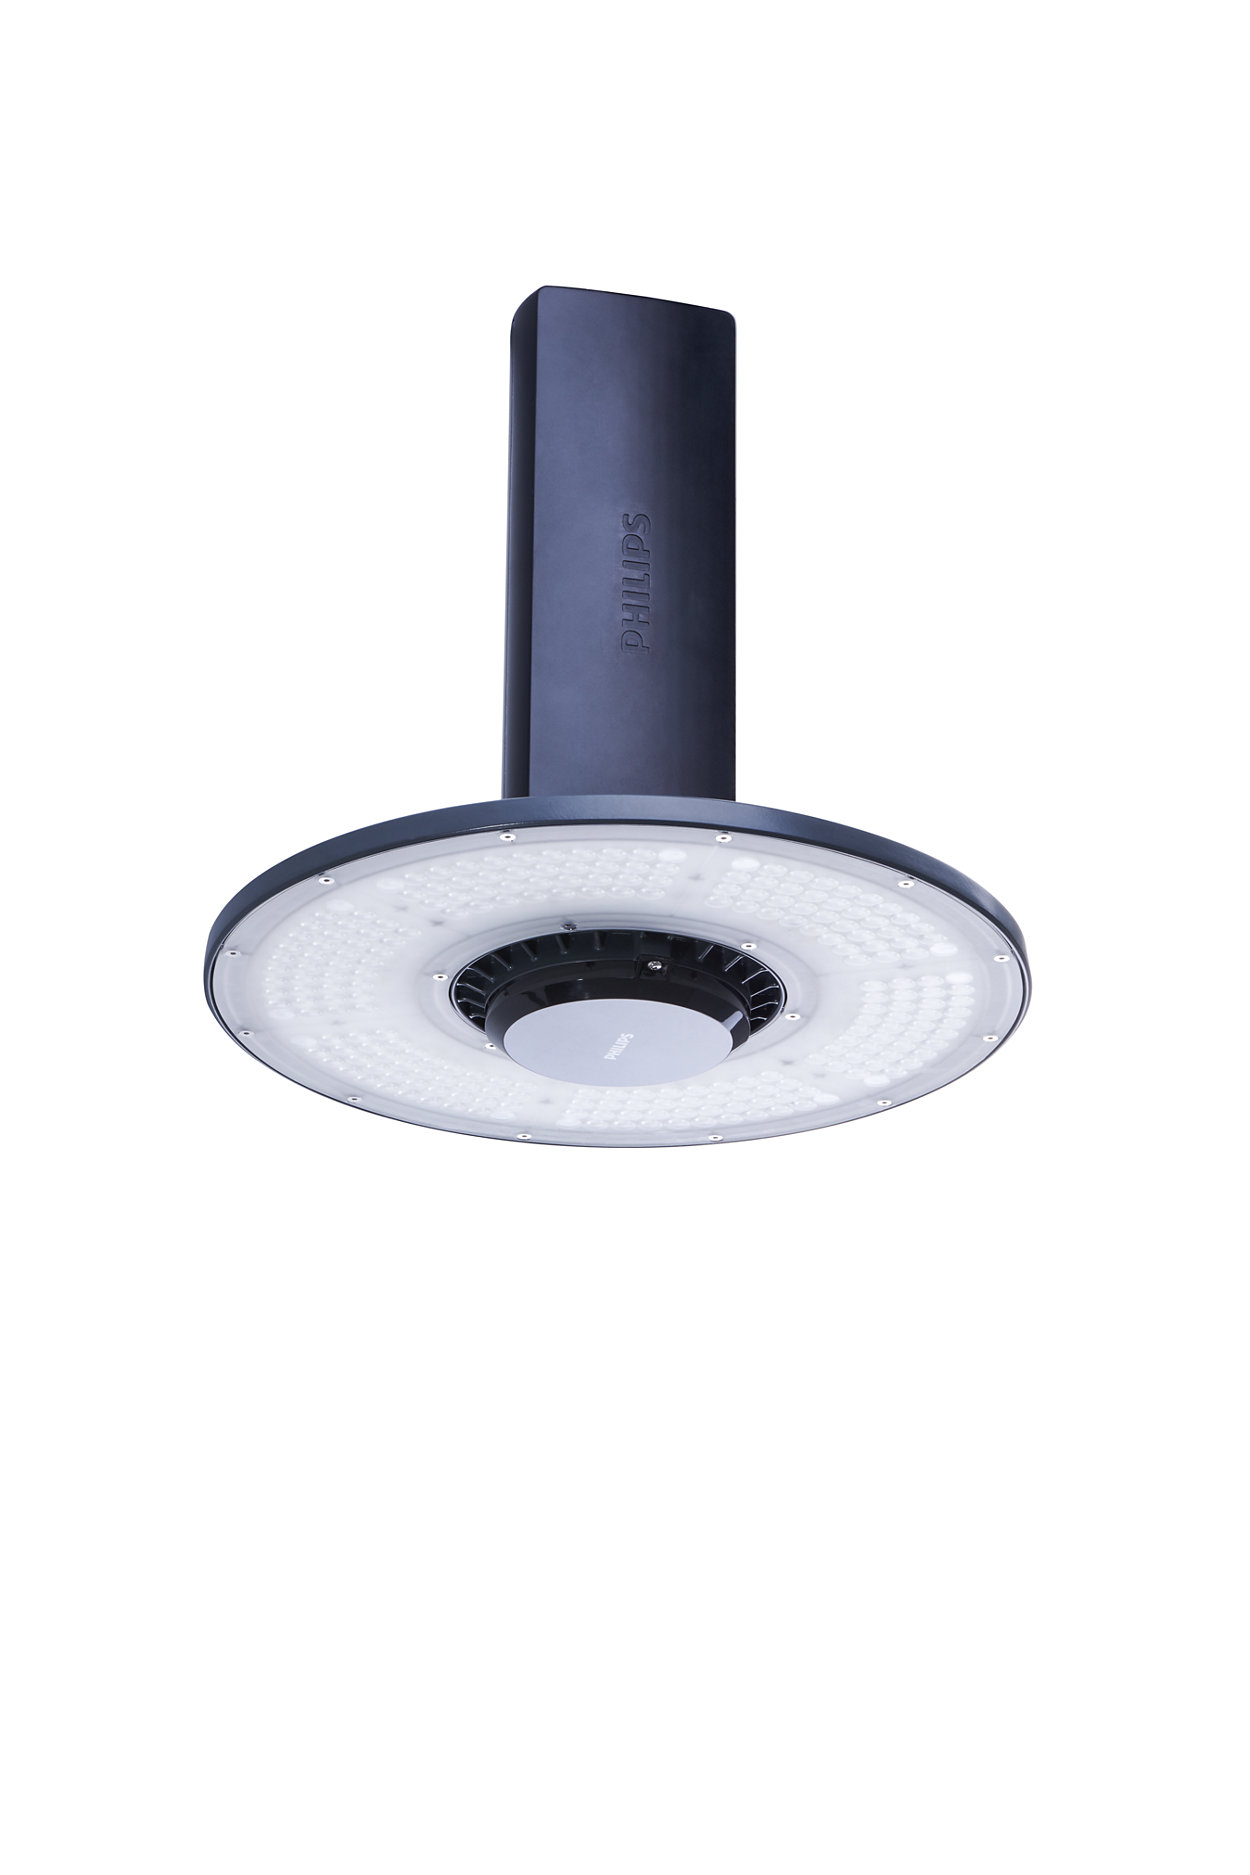 A versatile highbay LED luminaire with high efficiency and future-proof connectivity